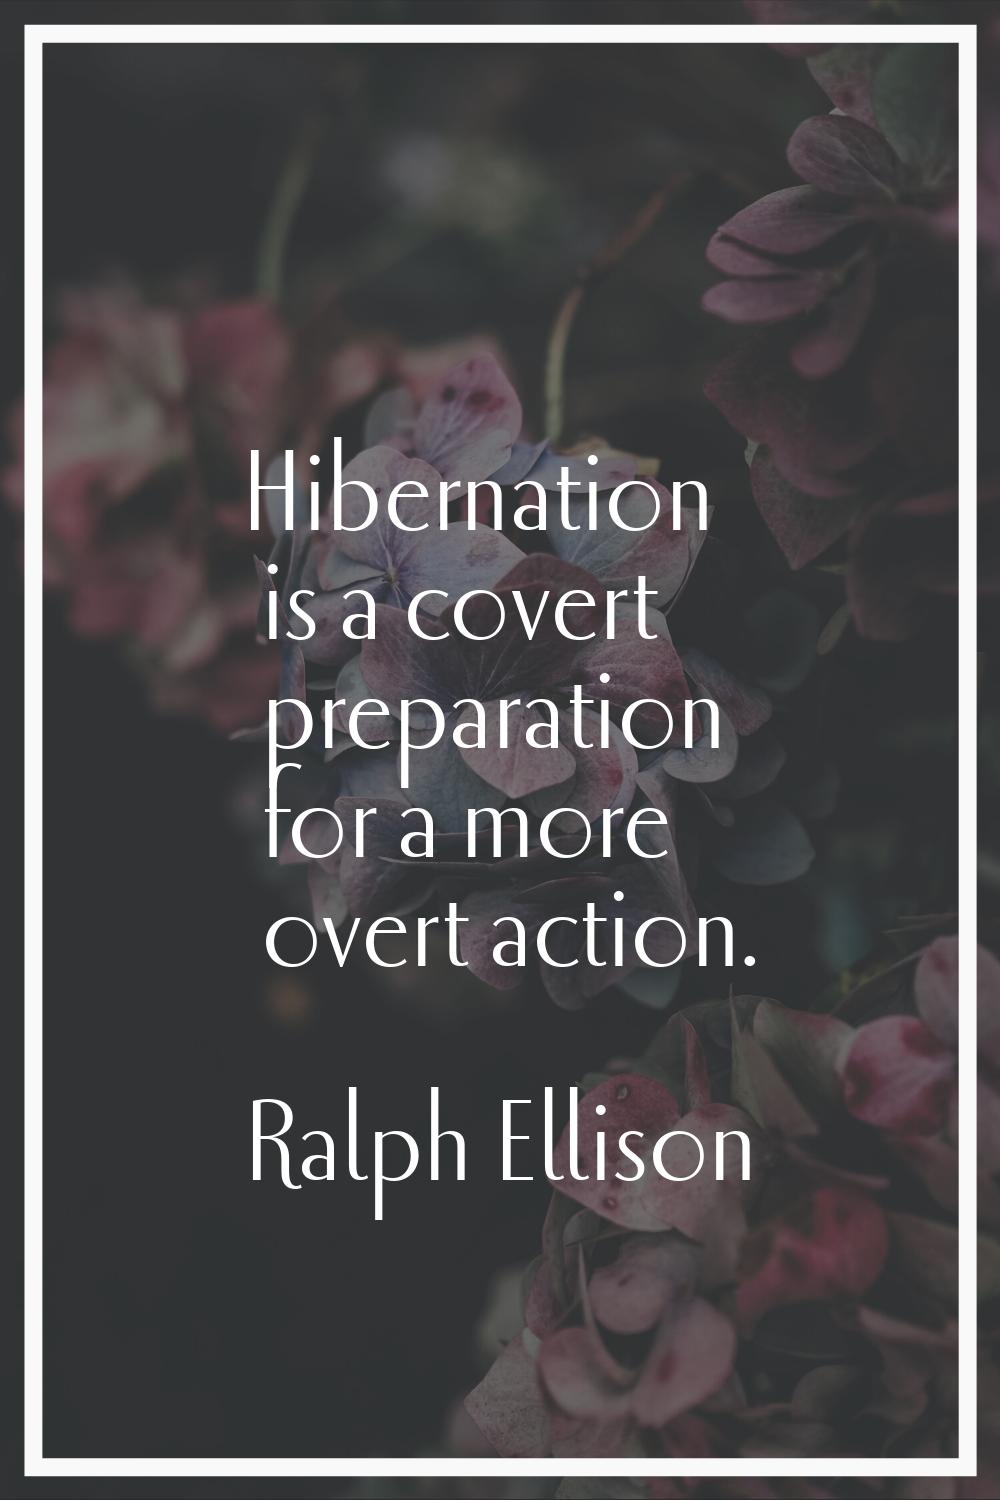 Hibernation is a covert preparation for a more overt action.